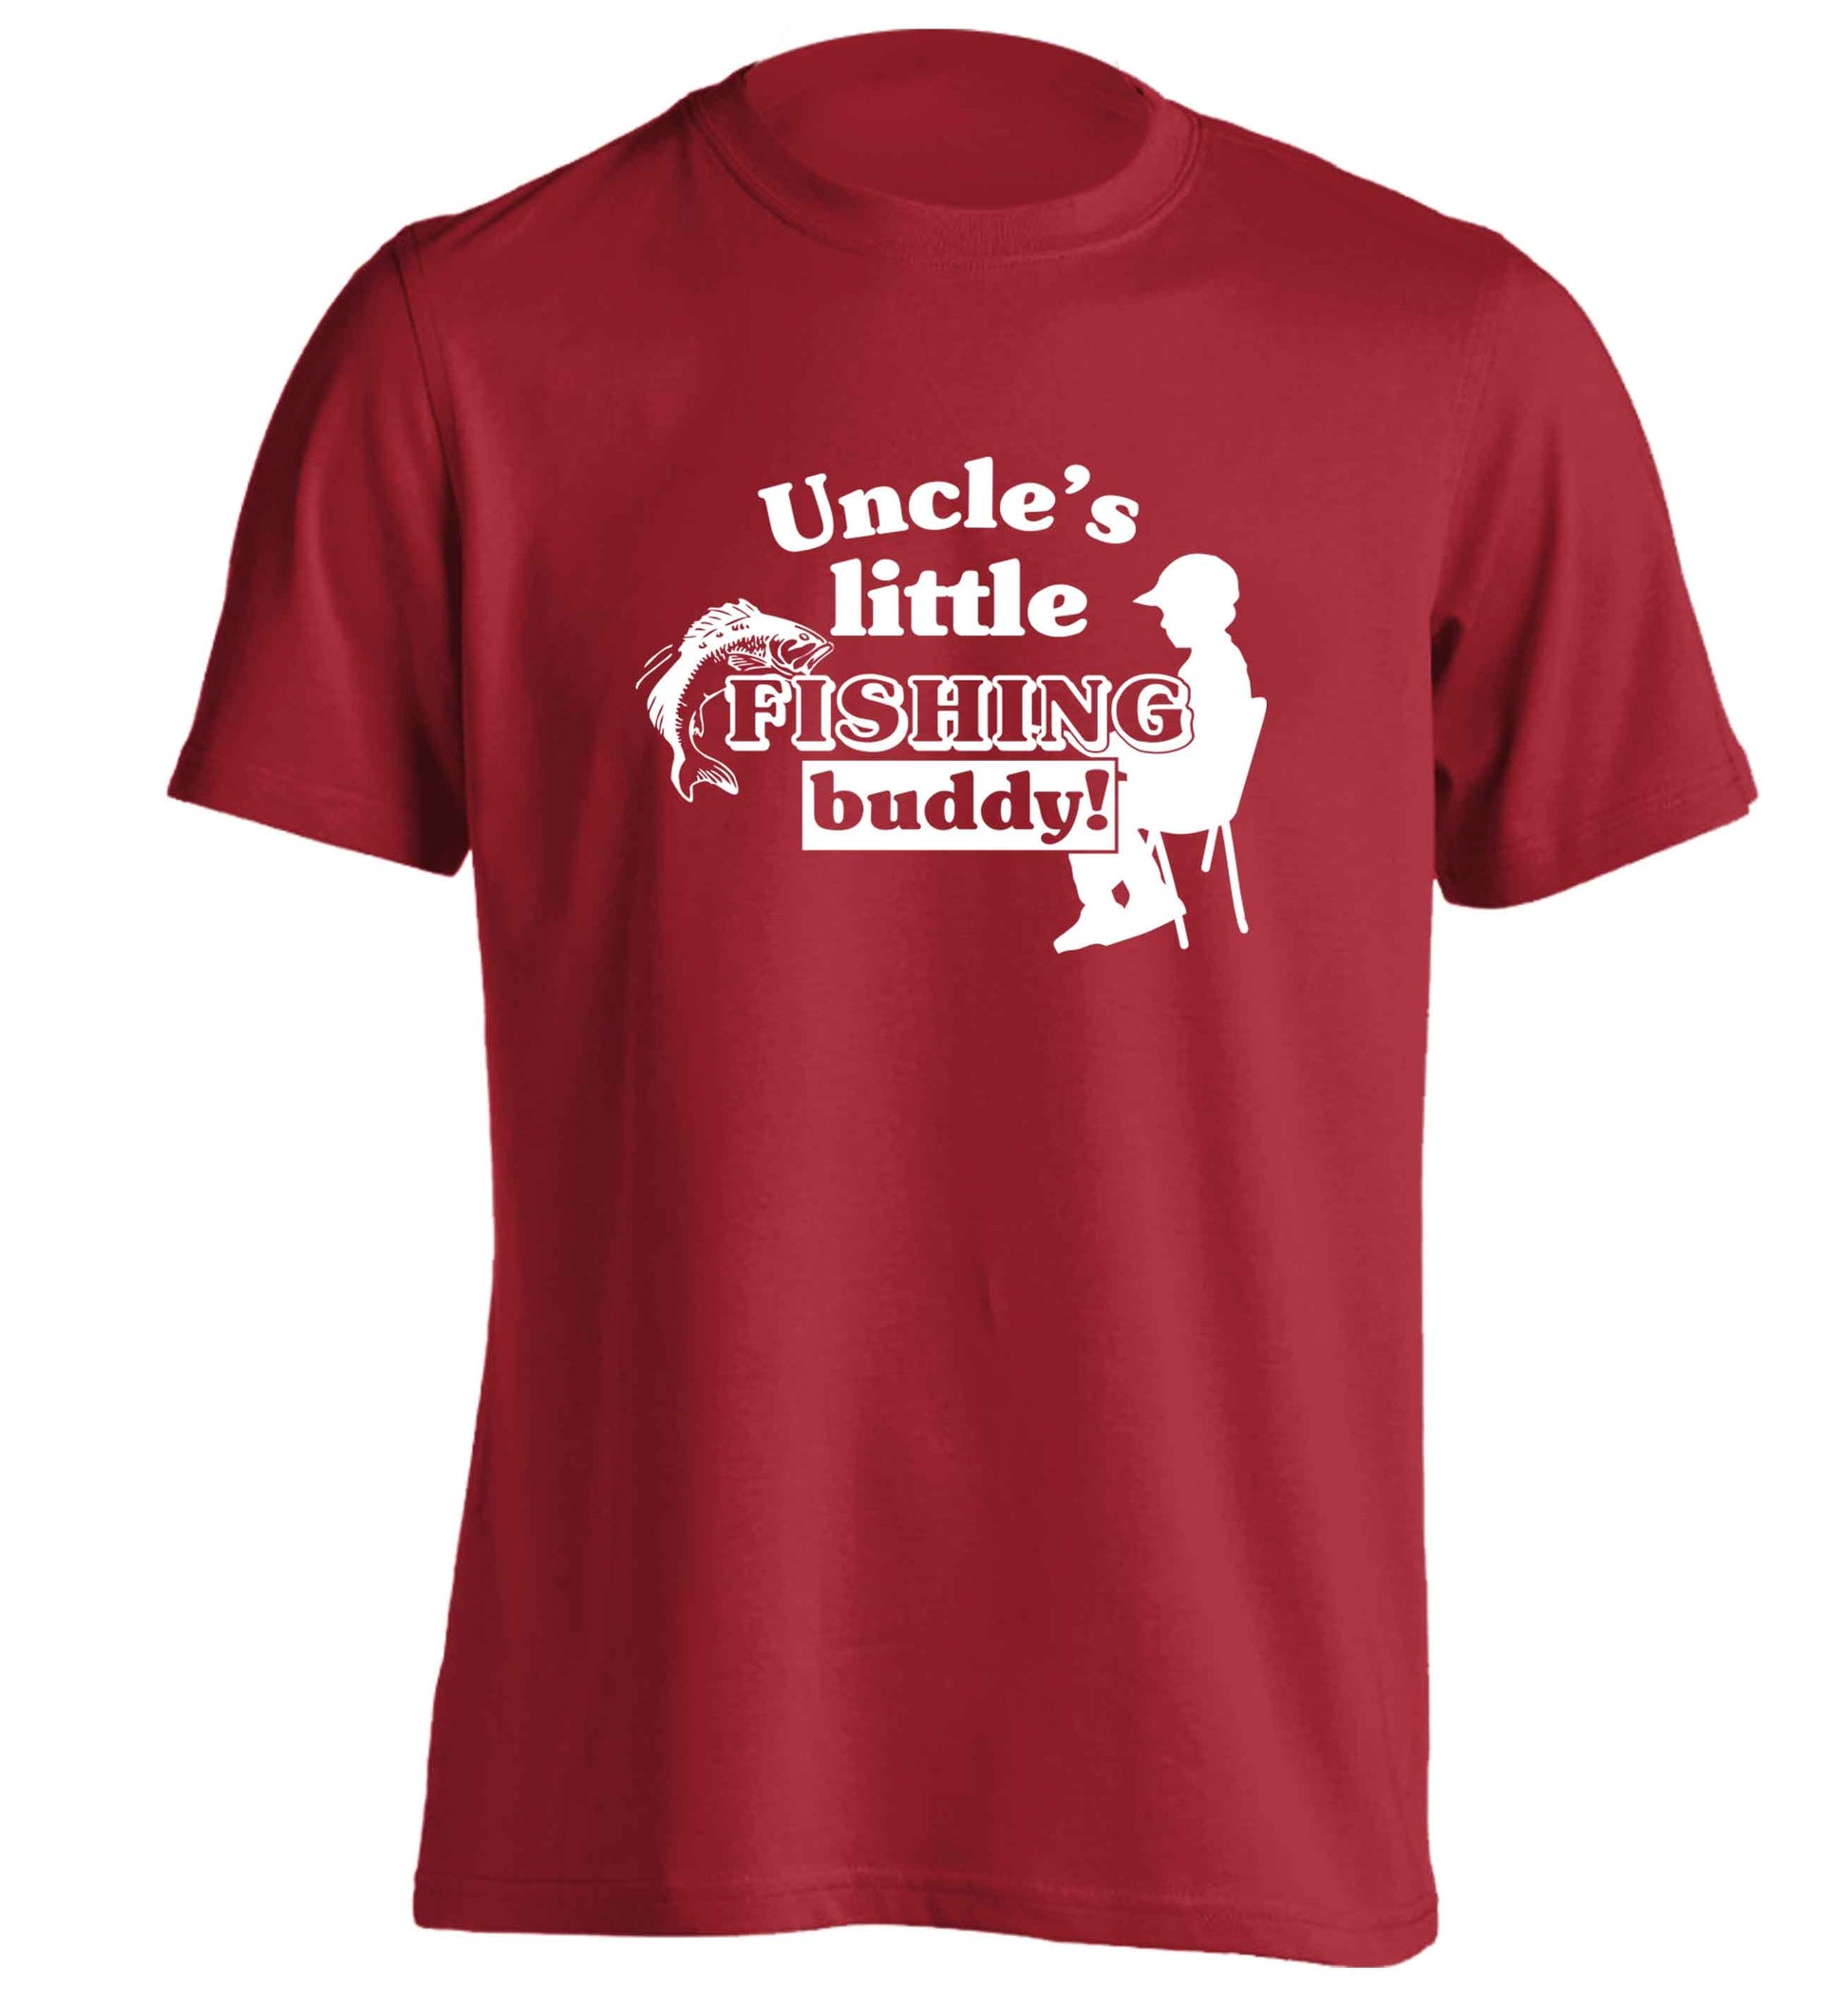 Uncle's little fishing buddy adults unisex red Tshirt 2XL